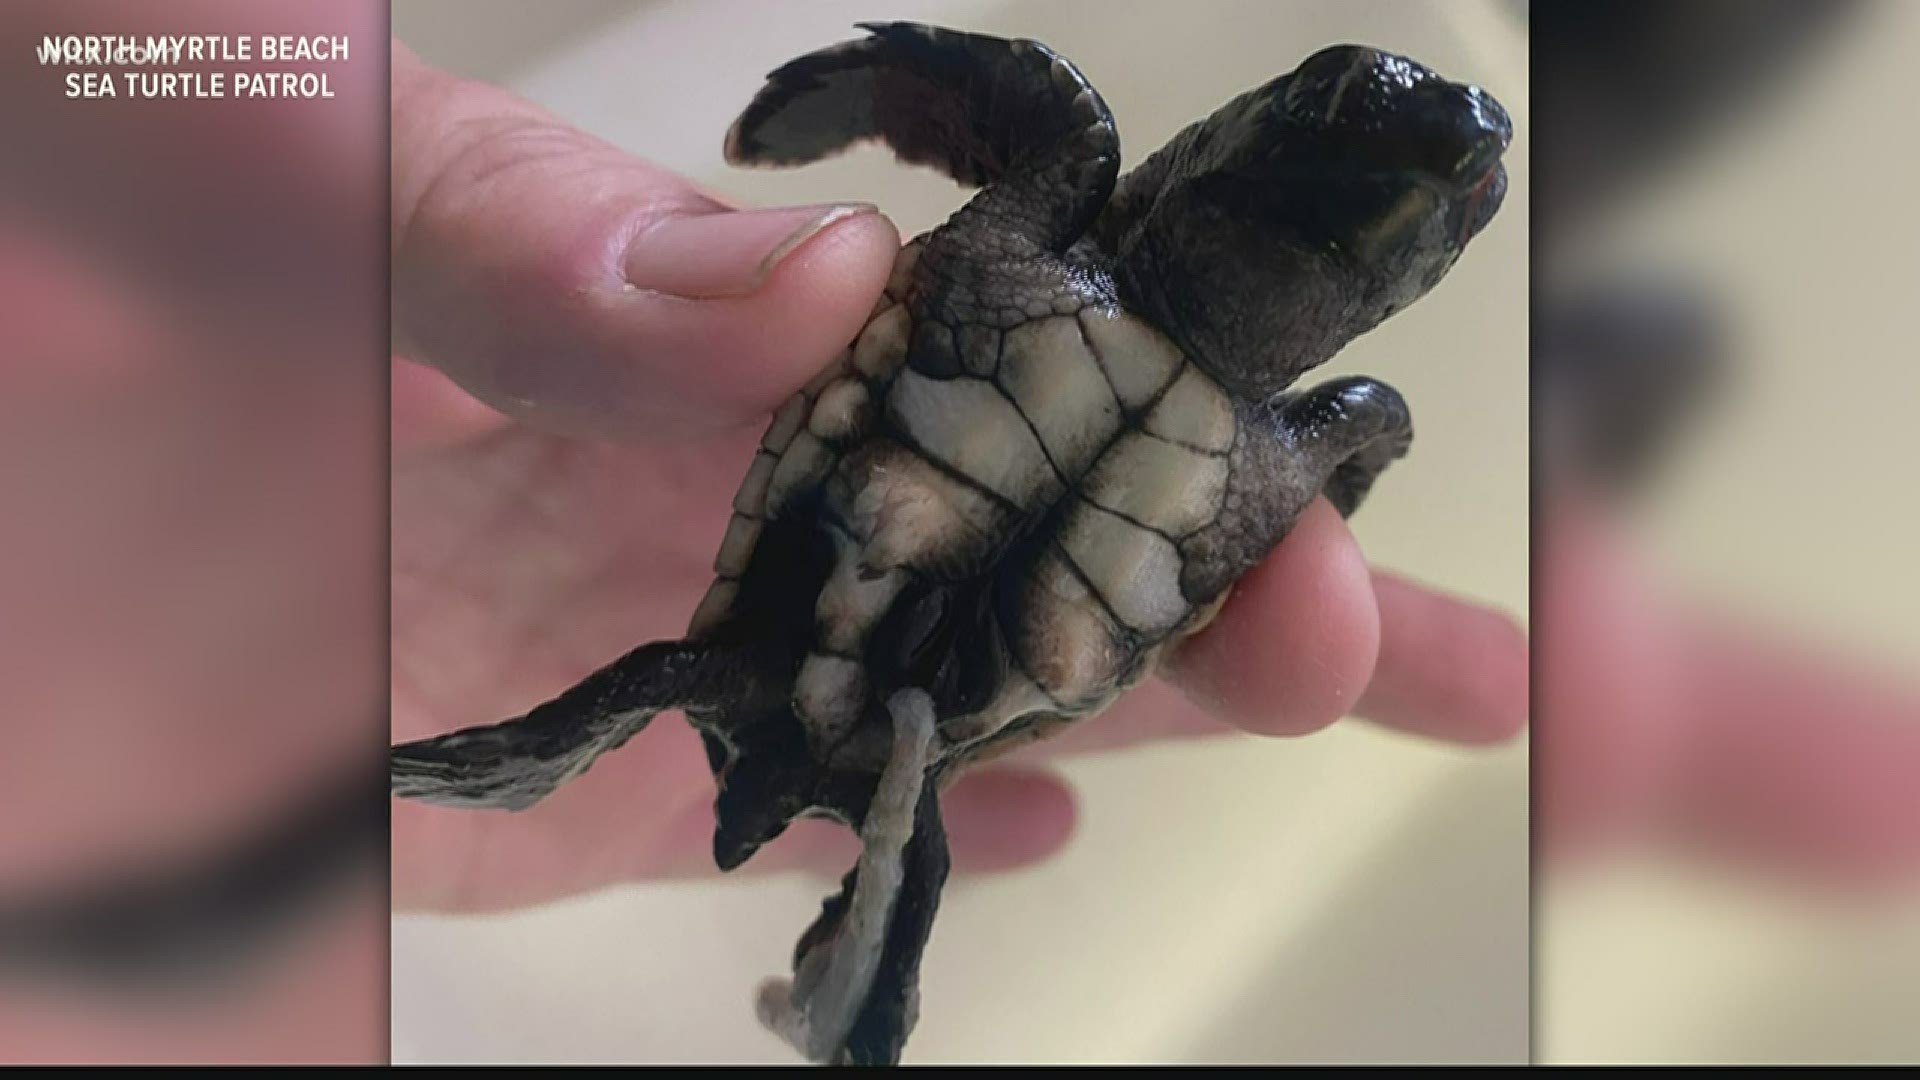 More than 100 loggerhead turtle babies were killed in the storm surge.